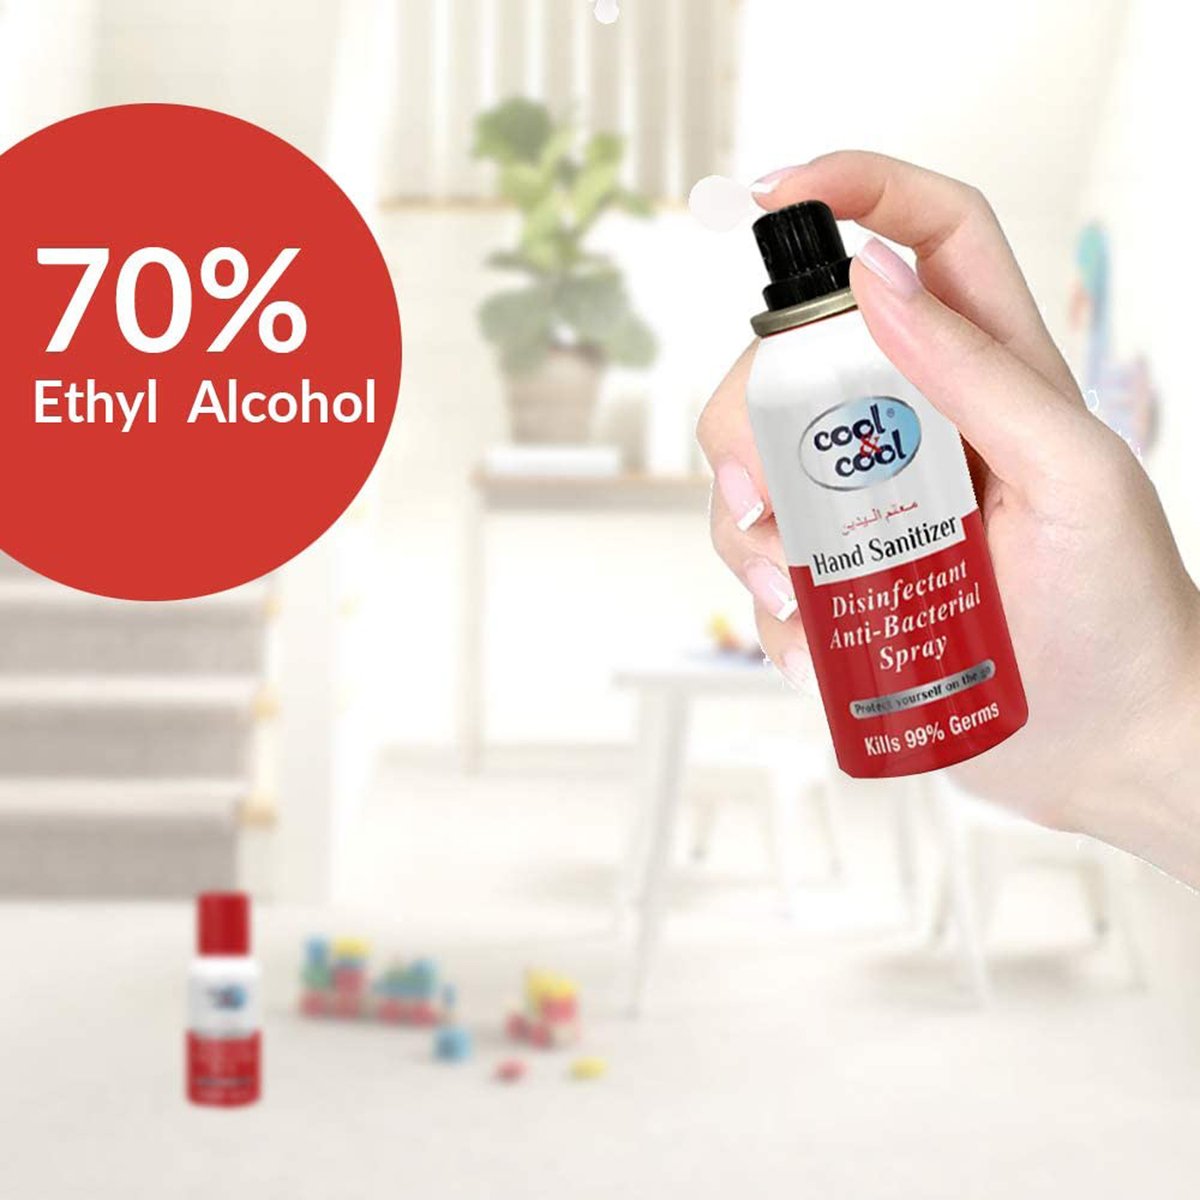 Cool & Cool Disinfectant Anti-Bacterial Hand Sanitizer Spray 120 ml